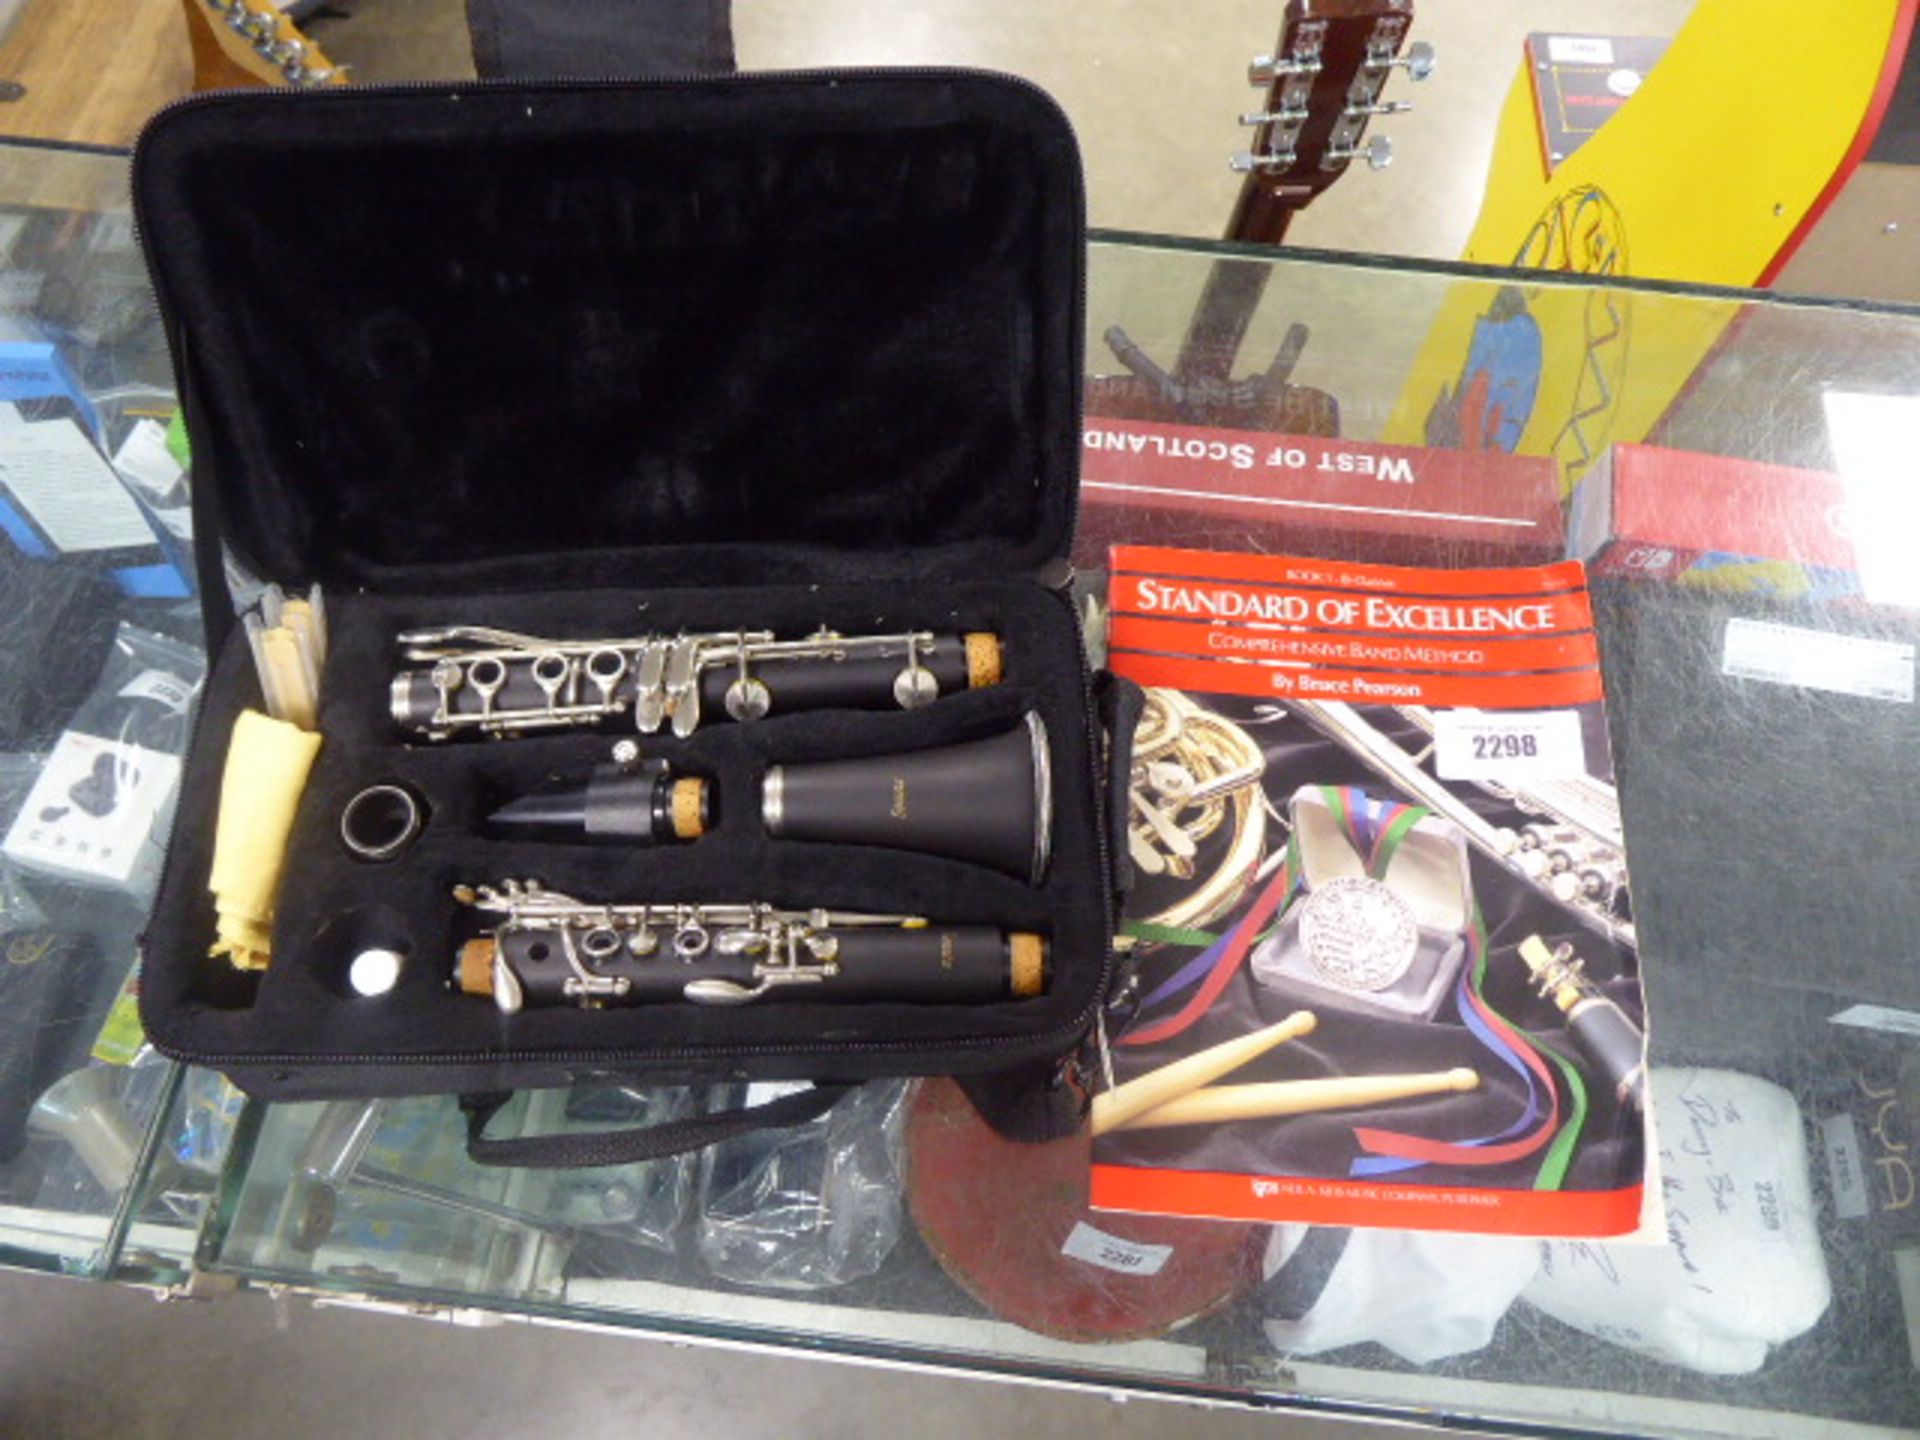 Sonata clarinet with case and 'Standard of Excellence' music booklet